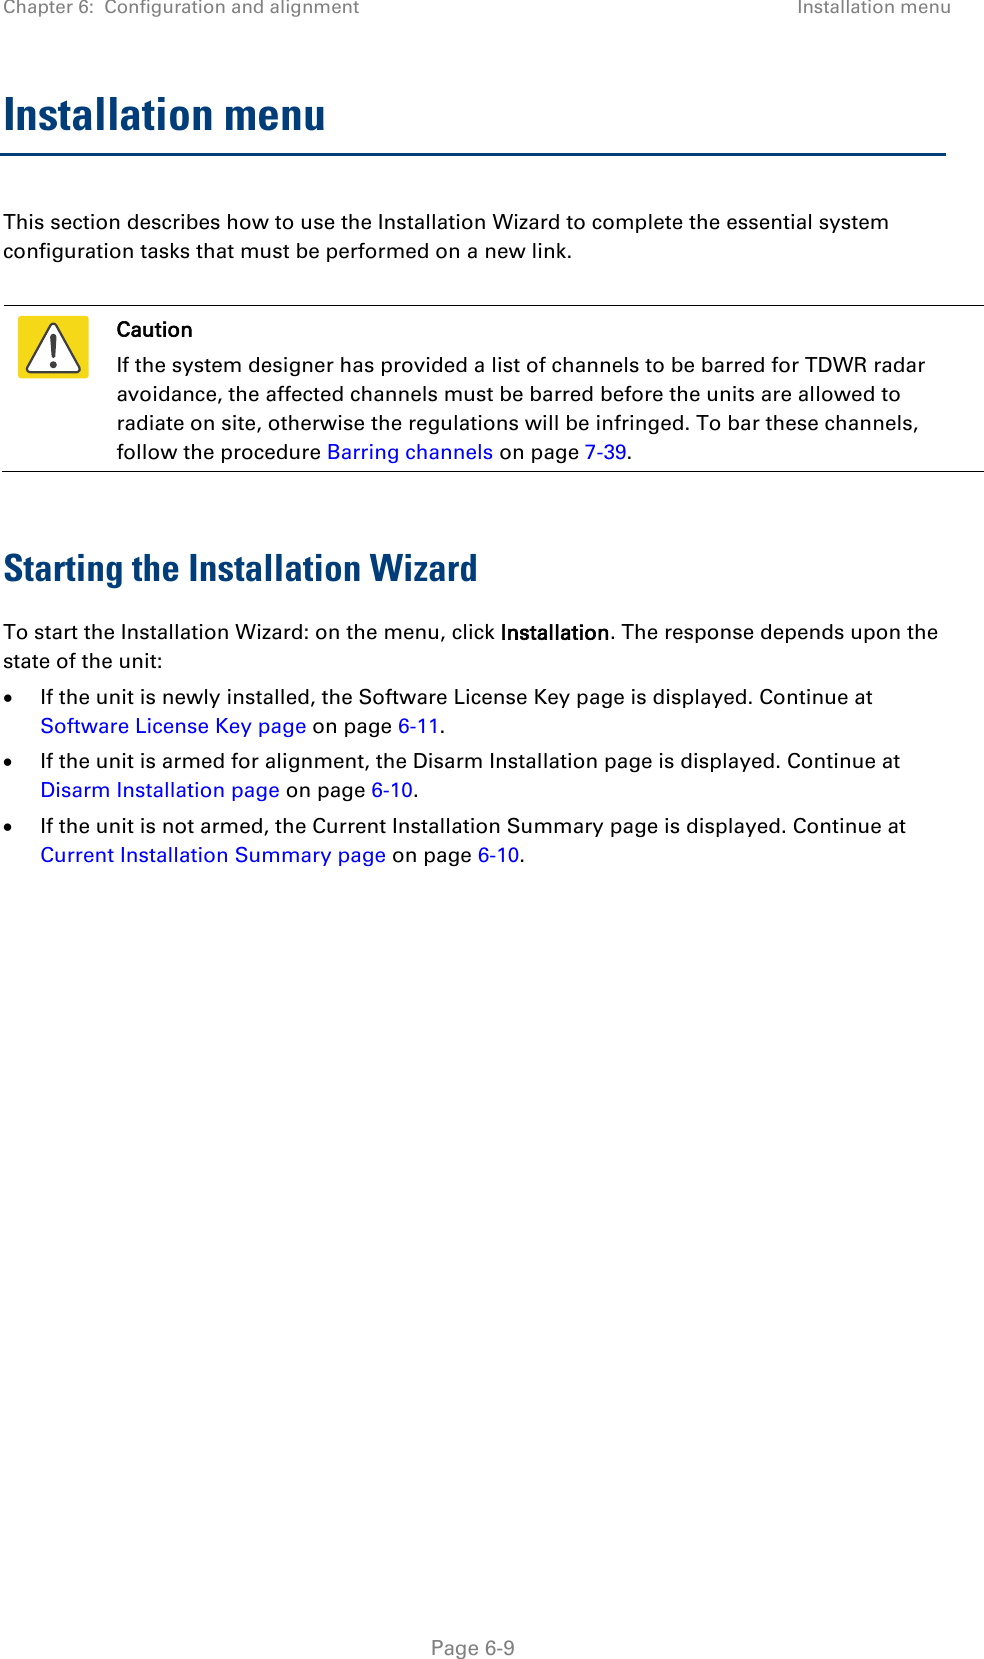 Chapter 6:  Configuration and alignment Installation menu  Installation menu This section describes how to use the Installation Wizard to complete the essential system configuration tasks that must be performed on a new link.   Caution If the system designer has provided a list of channels to be barred for TDWR radar avoidance, the affected channels must be barred before the units are allowed to radiate on site, otherwise the regulations will be infringed. To bar these channels, follow the procedure Barring channels on page 7-39.  Starting the Installation Wizard To start the Installation Wizard: on the menu, click Installation. The response depends upon the state of the unit: • If the unit is newly installed, the Software License Key page is displayed. Continue at Software License Key page on page 6-11. • If the unit is armed for alignment, the Disarm Installation page is displayed. Continue at Disarm Installation page on page 6-10. • If the unit is not armed, the Current Installation Summary page is displayed. Continue at Current Installation Summary page on page 6-10.   Page 6-9 